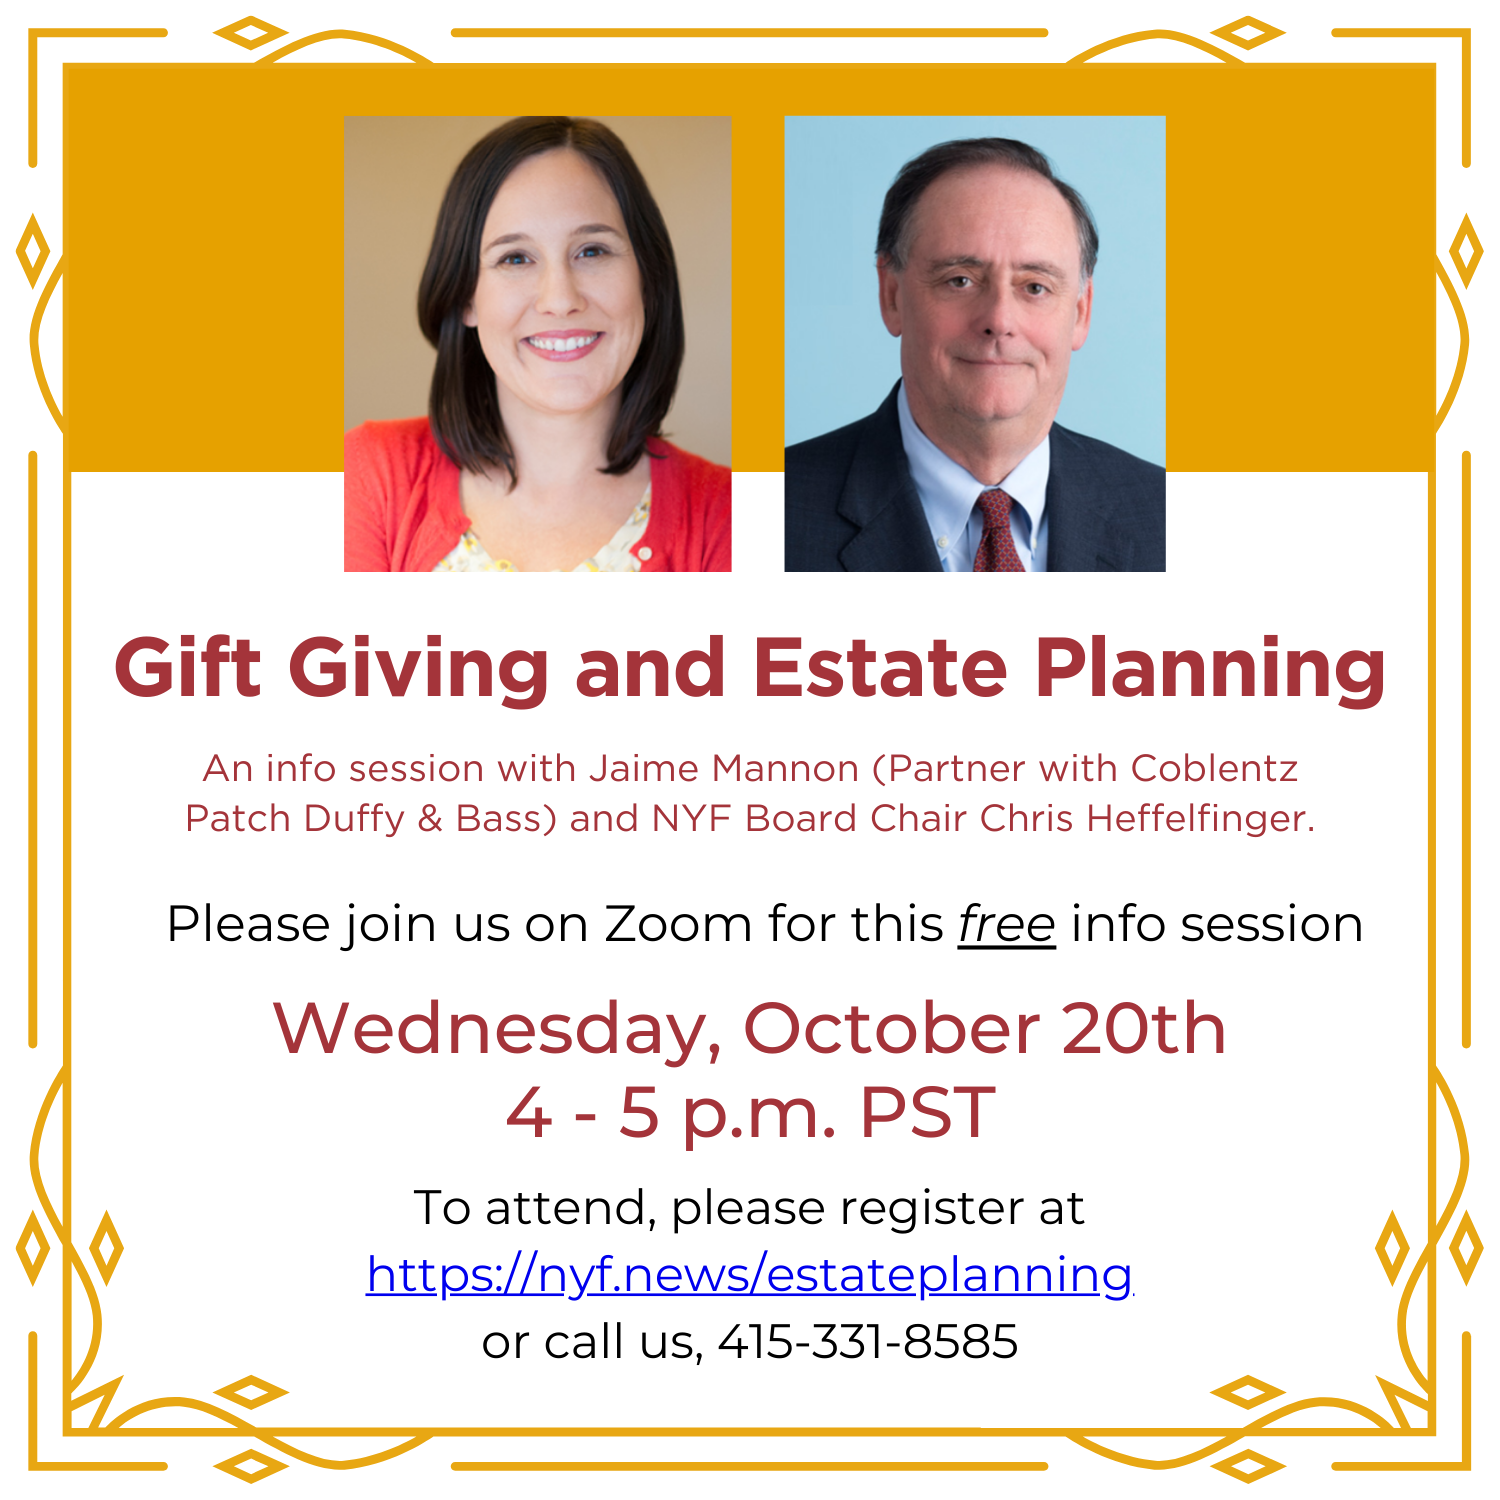 Gift Giving and Estate Planning Info Session